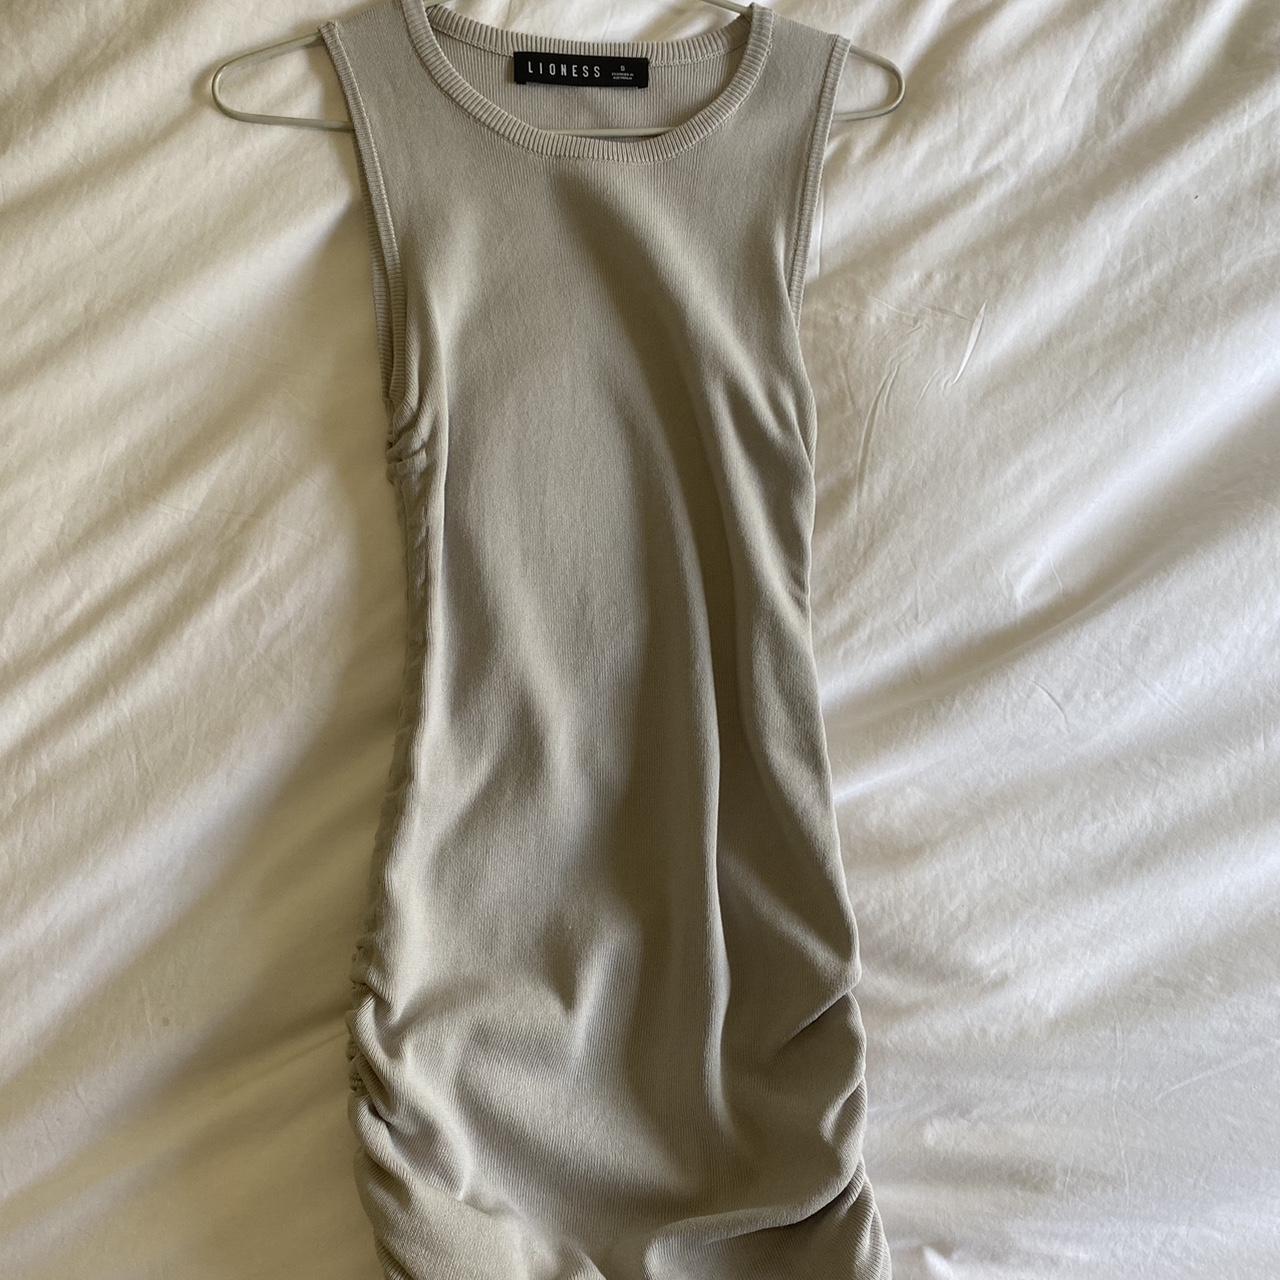 Lioness dress / size s / worn once / perfect condition - Depop